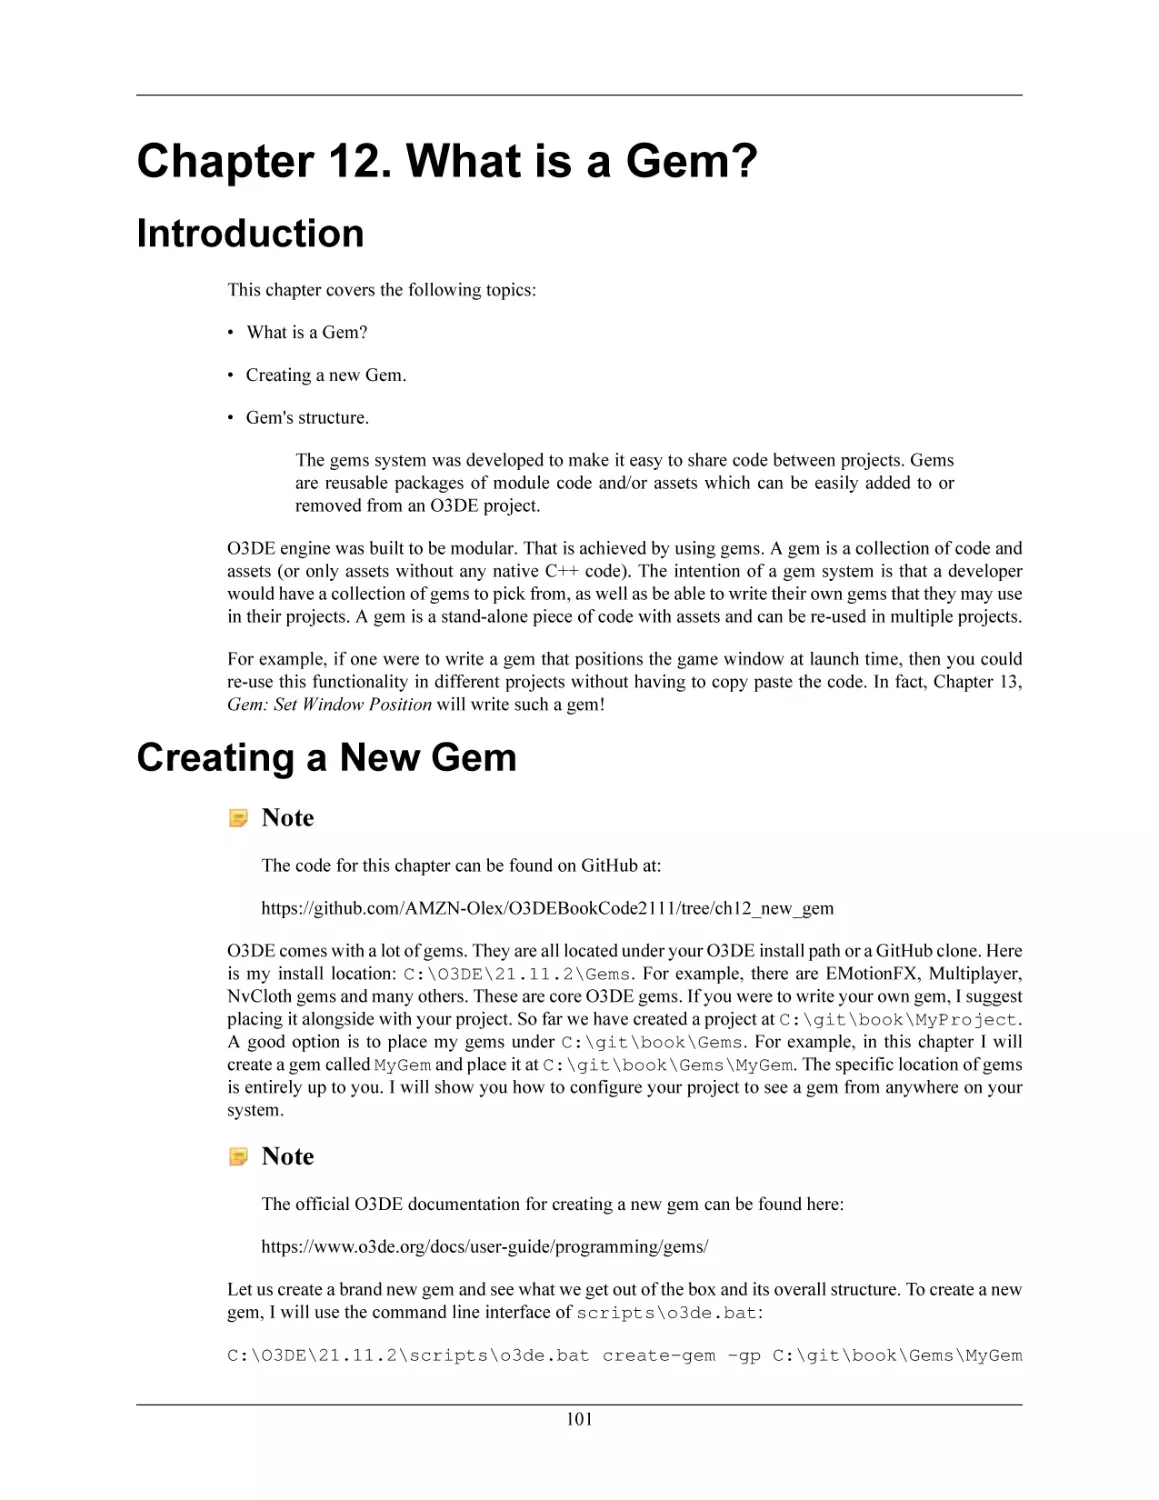 Chapter 12. What is a Gem?
Introduction
Creating a New Gem